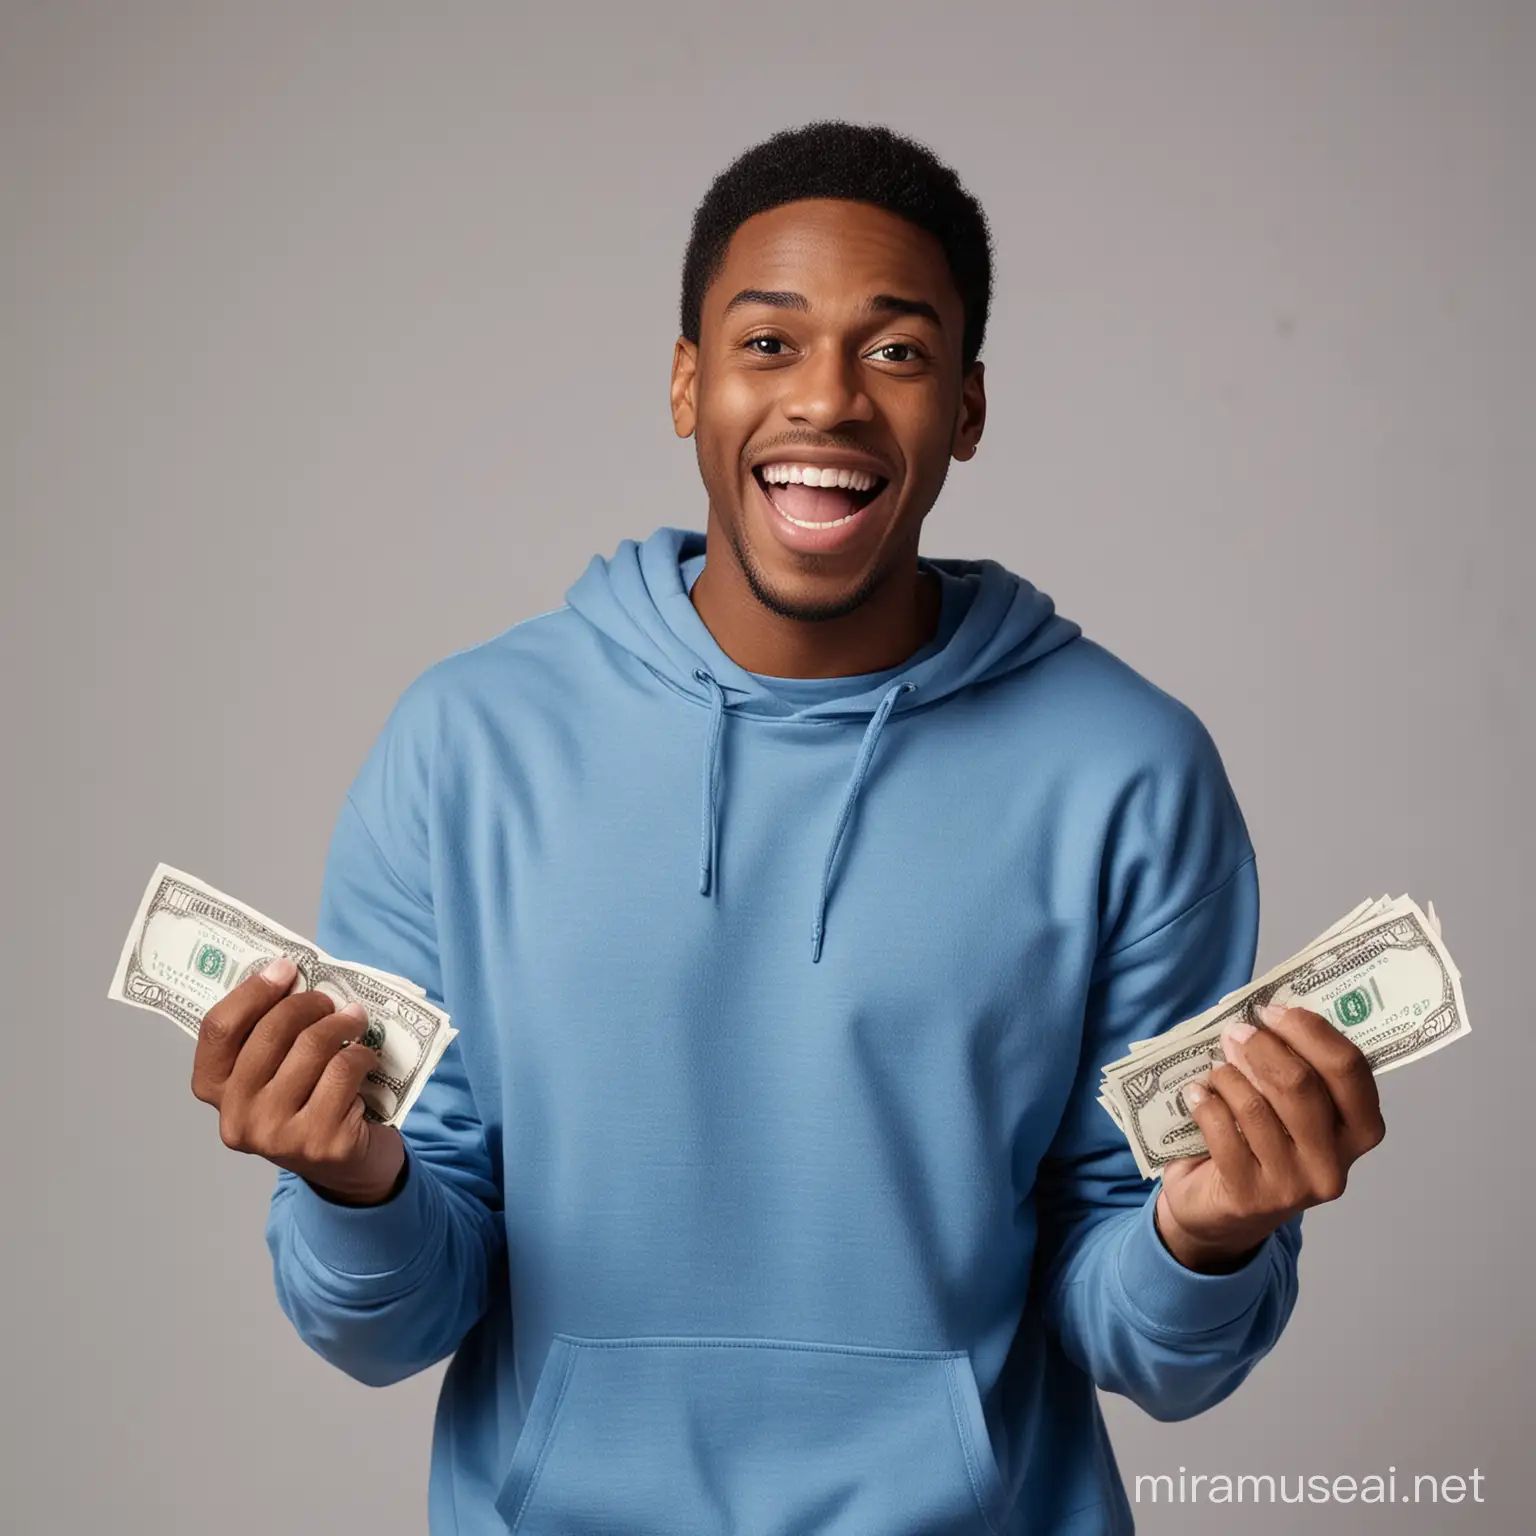 Excited Black Man Holding Money and Wearing Blue Sweatshirt